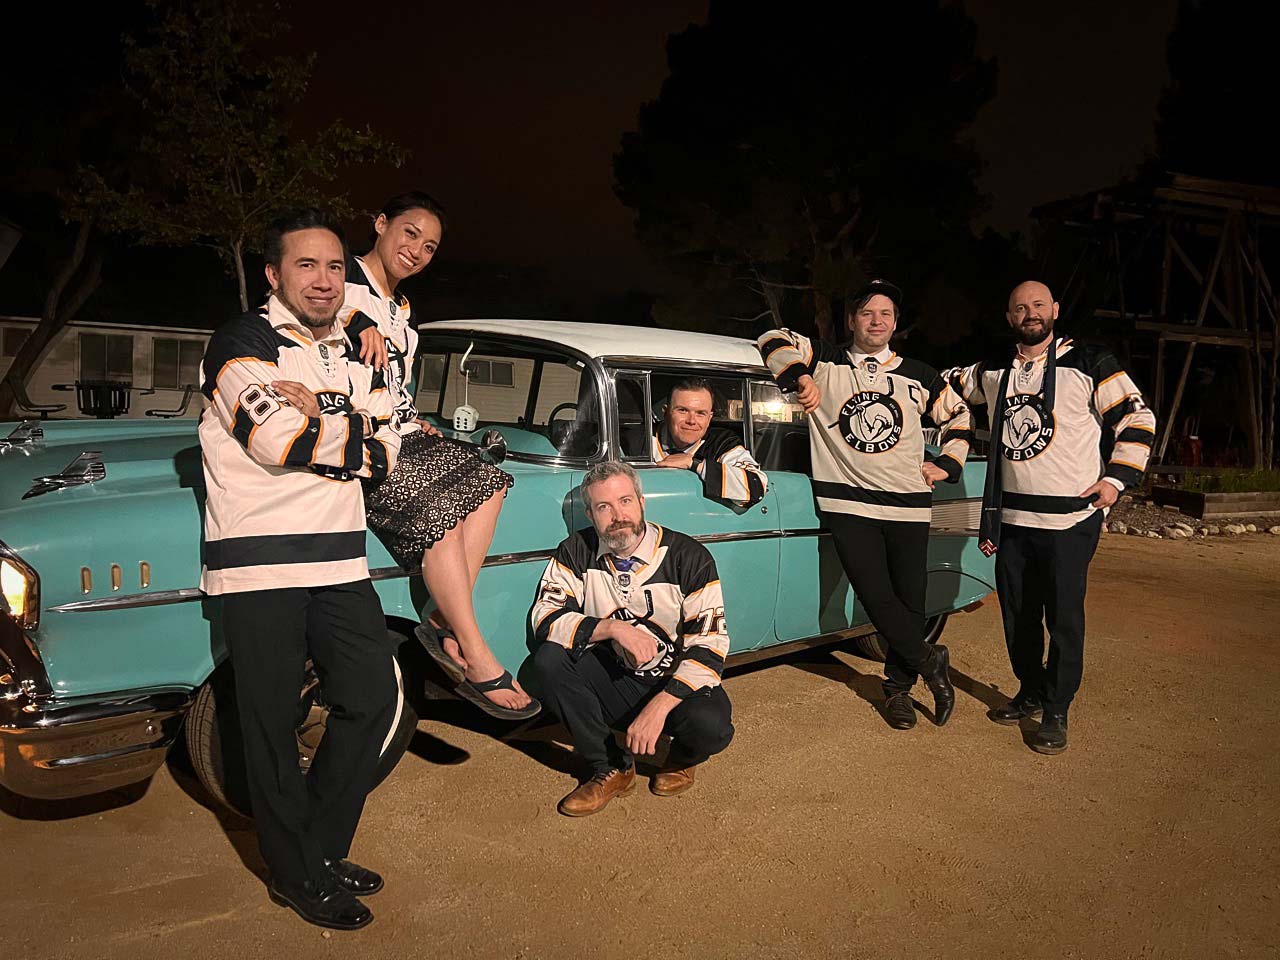 The Morning Spins in their Flying Elbows jerseys in and around a classic car